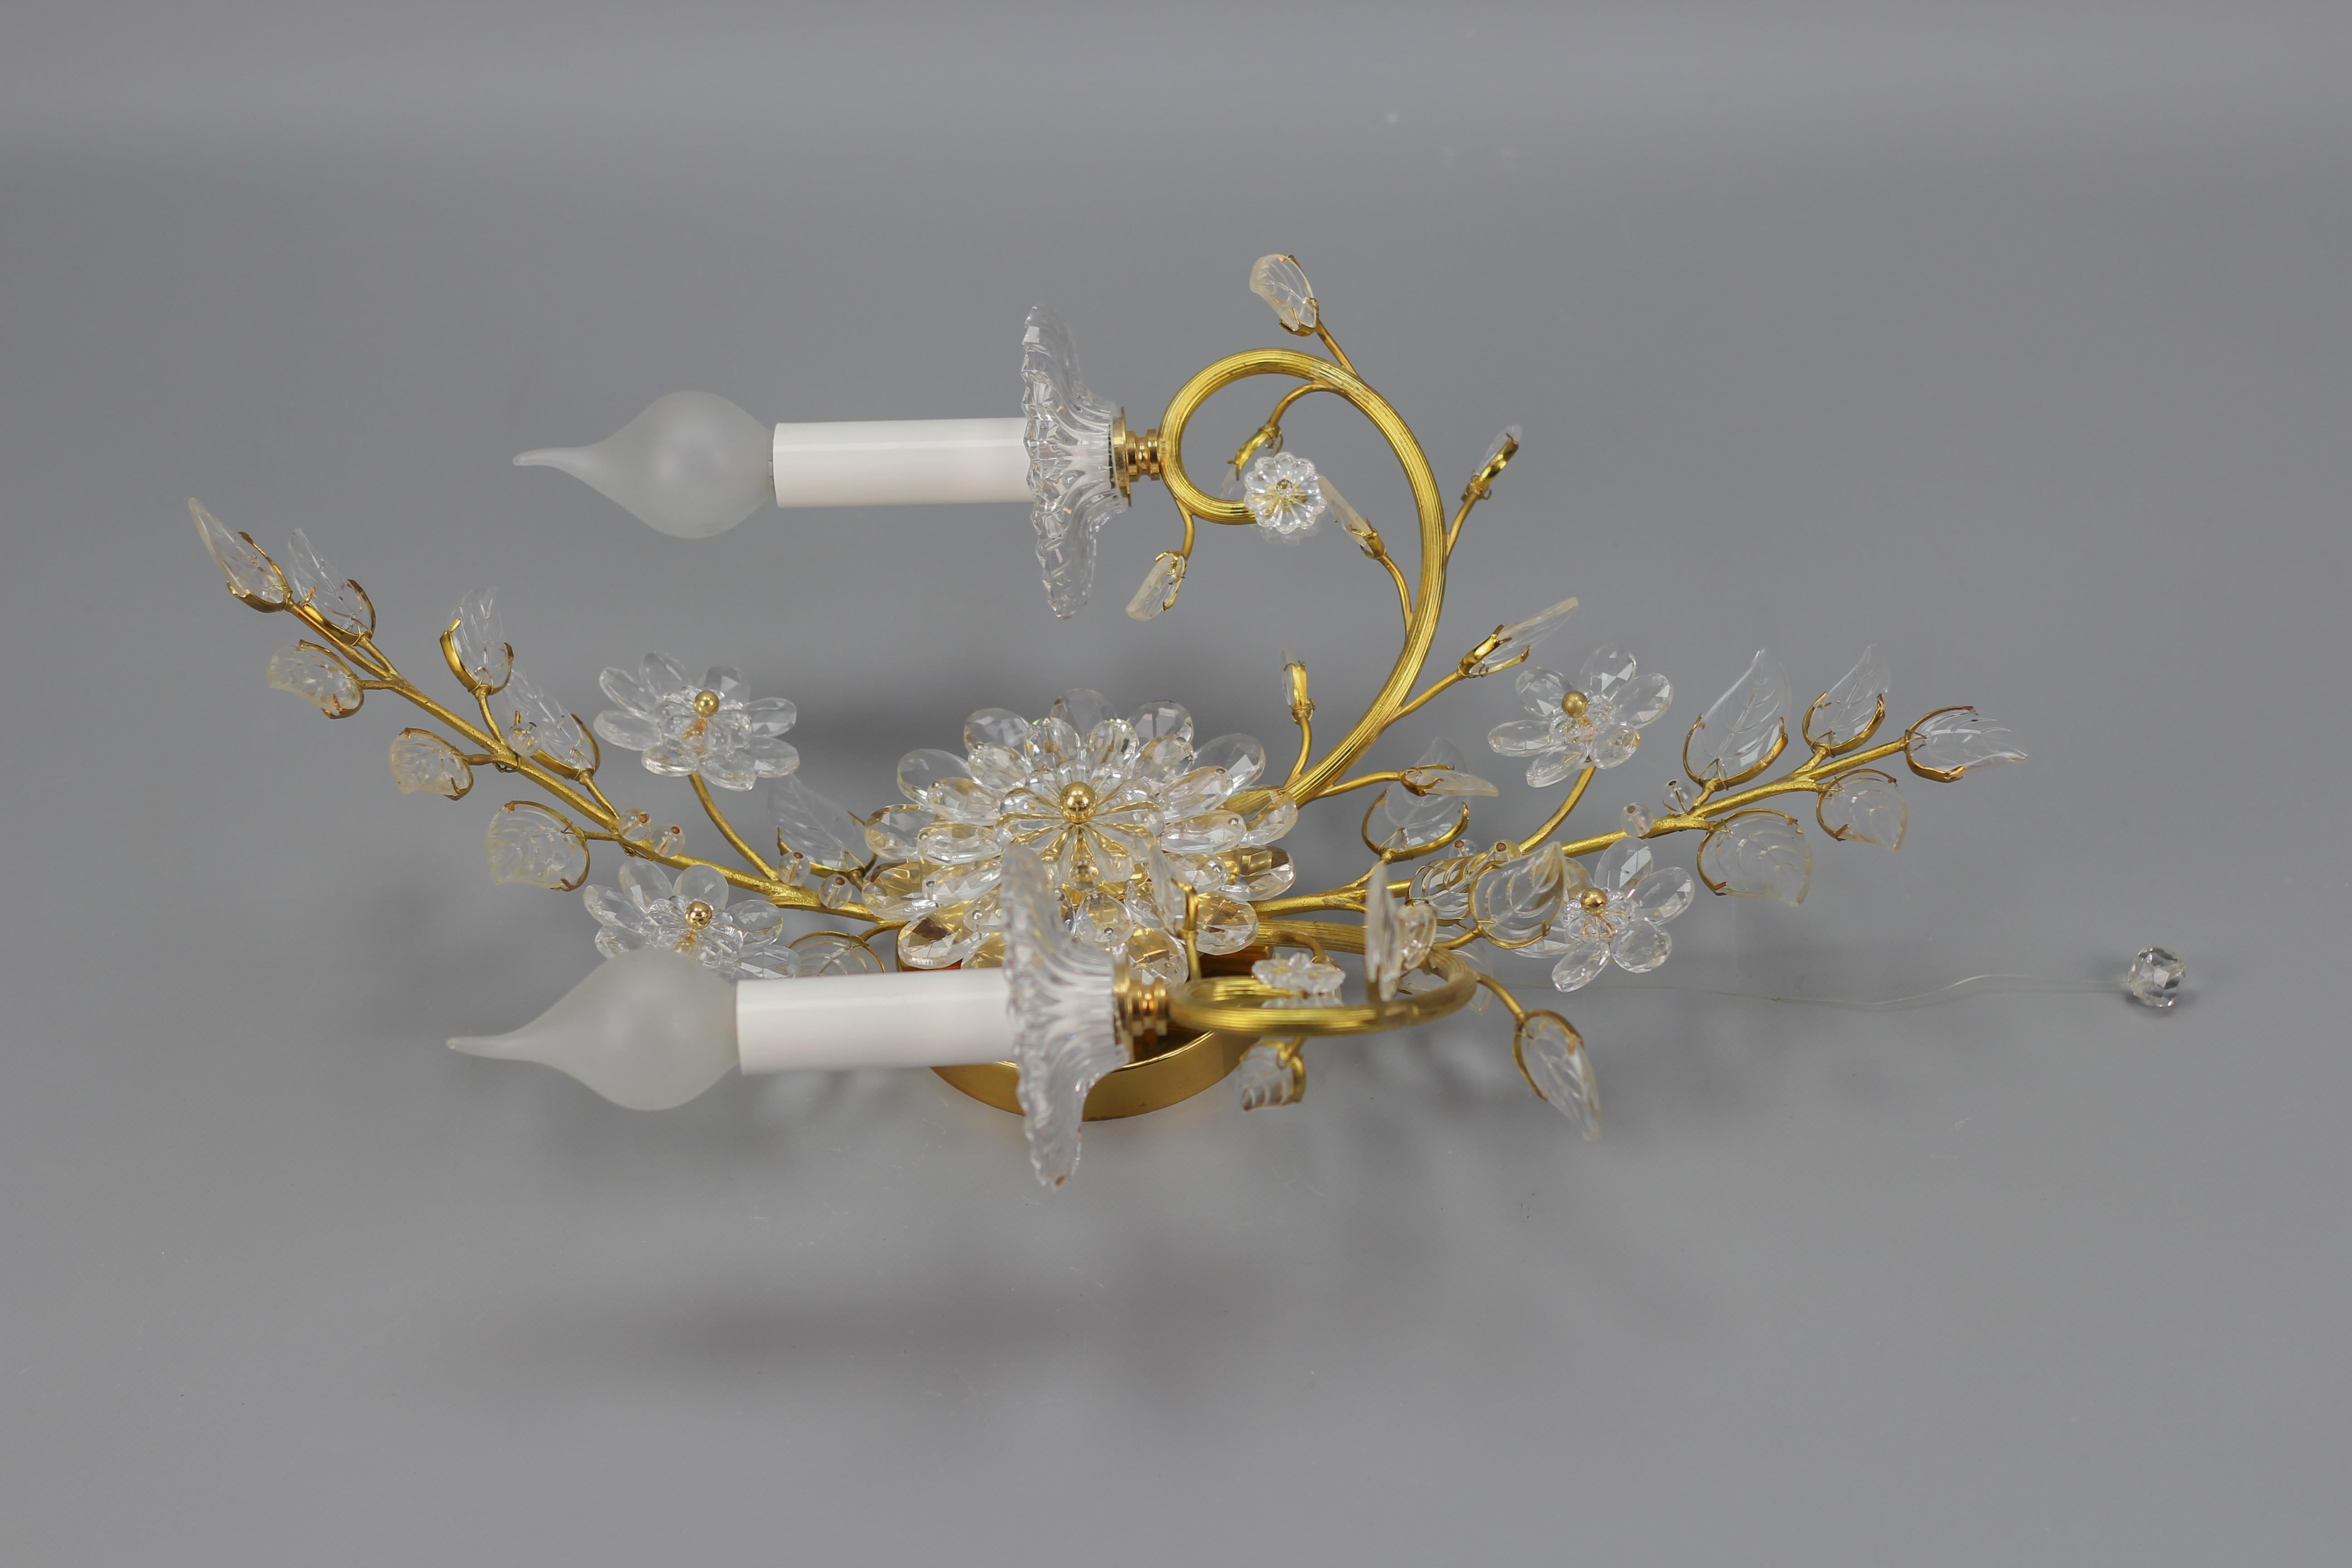 Palme & Walter Crystal and Brass Floral Wall Sconce by Palwa, Germany, 1960s For Sale 1